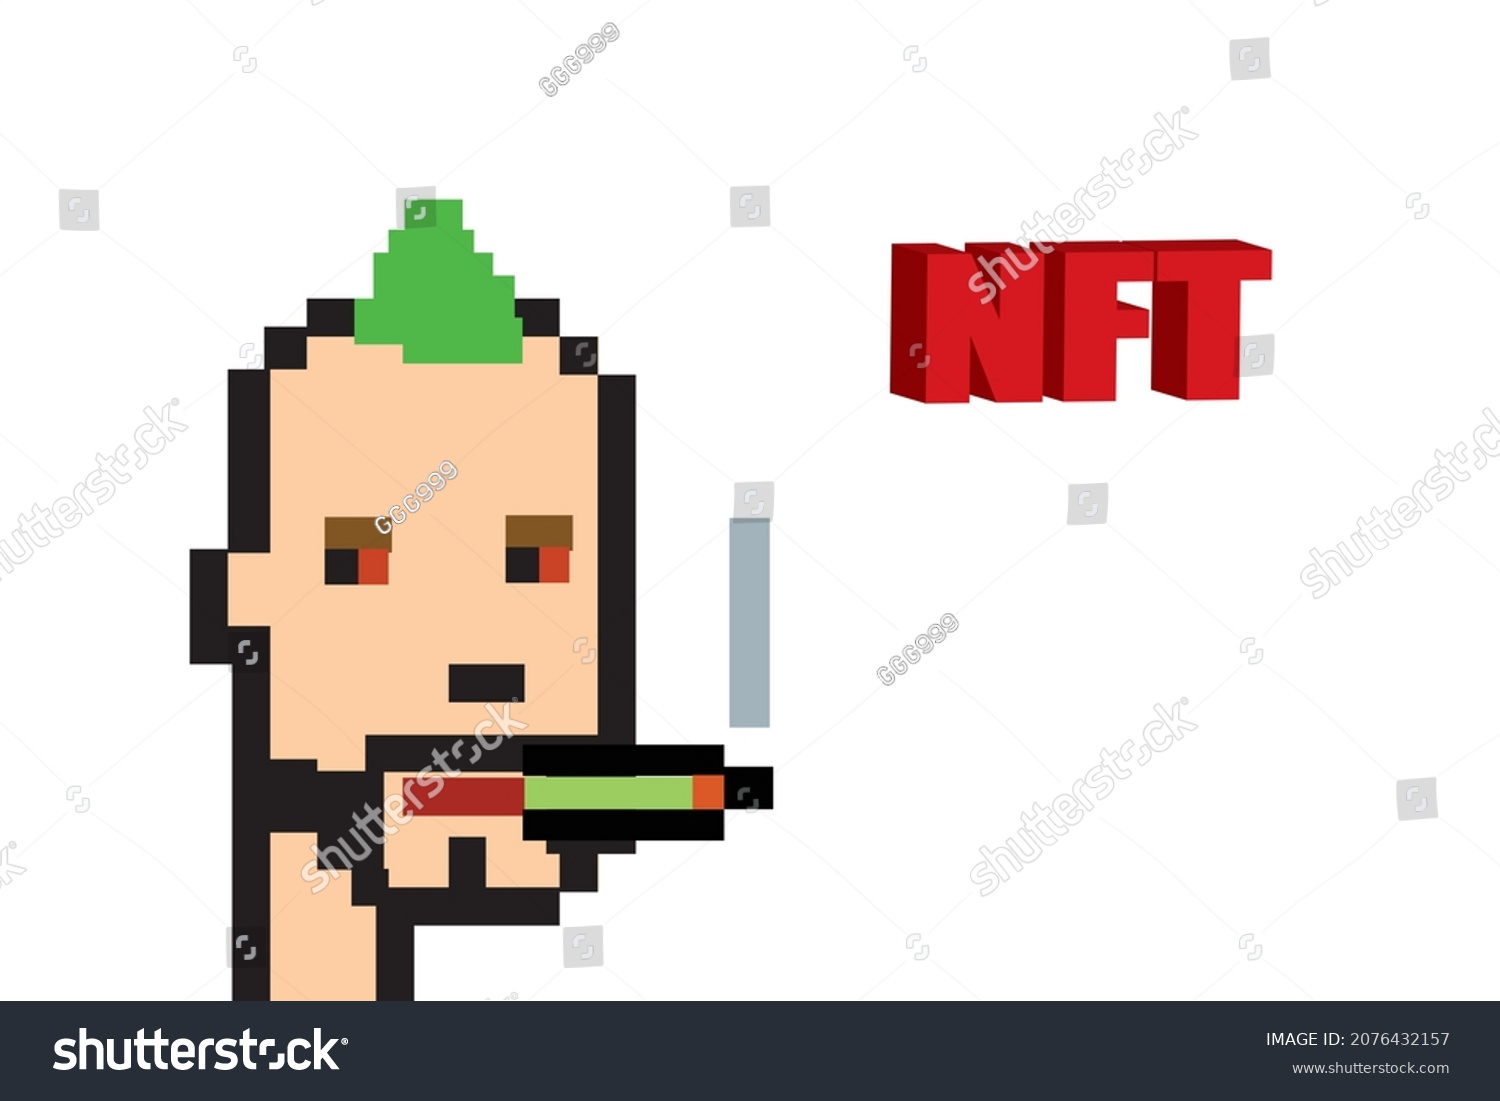 SVG of Cryptopunk NFT blockchain, non fungible. Pixel art character. smoking joint. red eyes svg